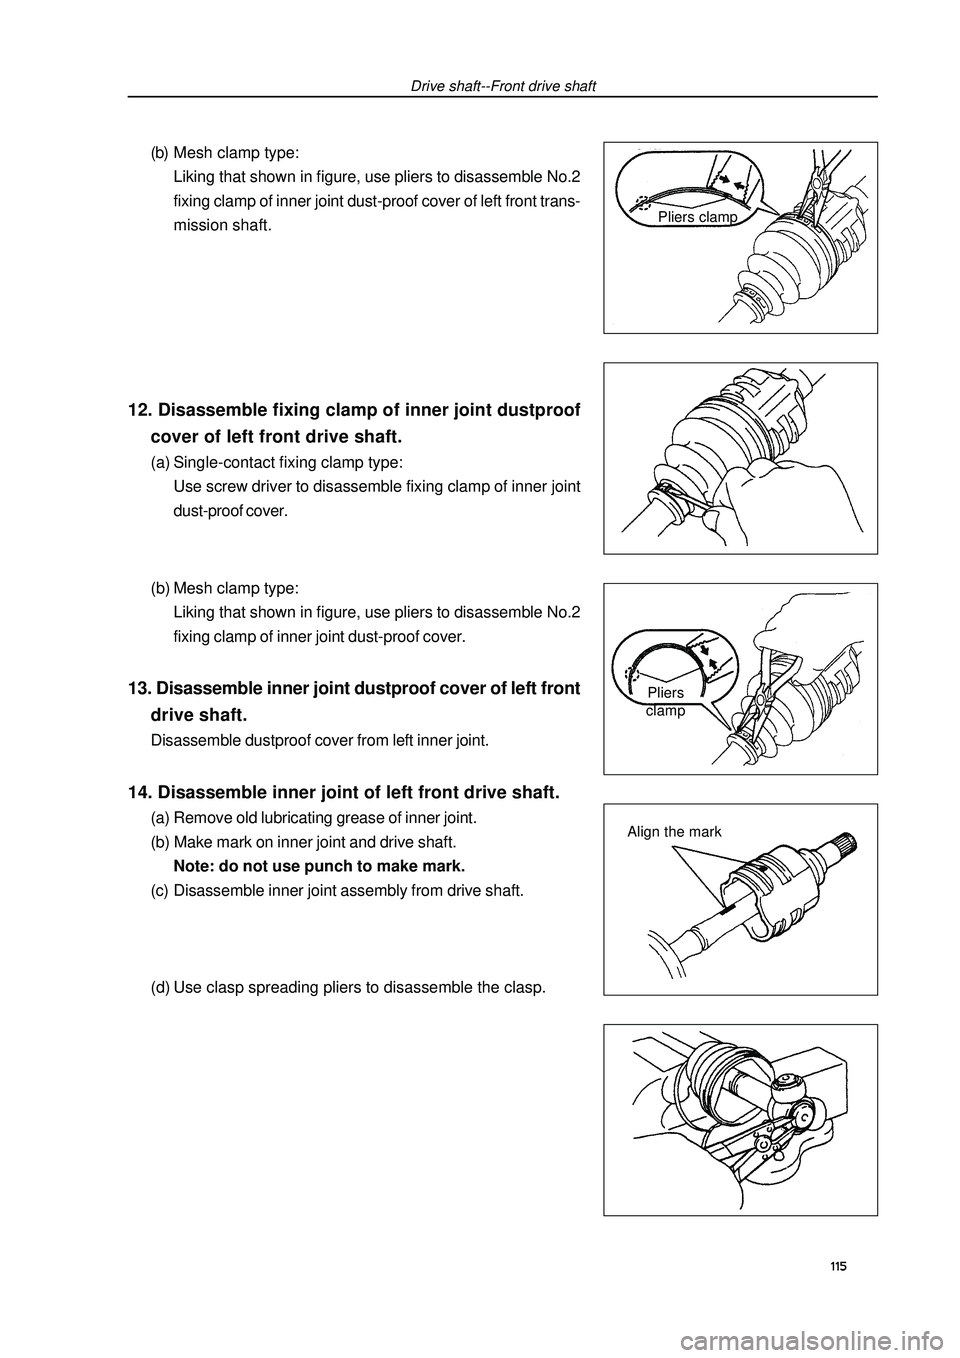 GEELY FC 2008  Workshop Manual Drive shaft--Front drive shaft(b) Mesh clamp type:
Liking that shown in figure, use pliers to disassemble No.2
fixing clamp of inner joint dust-proof cover of left front trans-
mission shaft.12. Disas